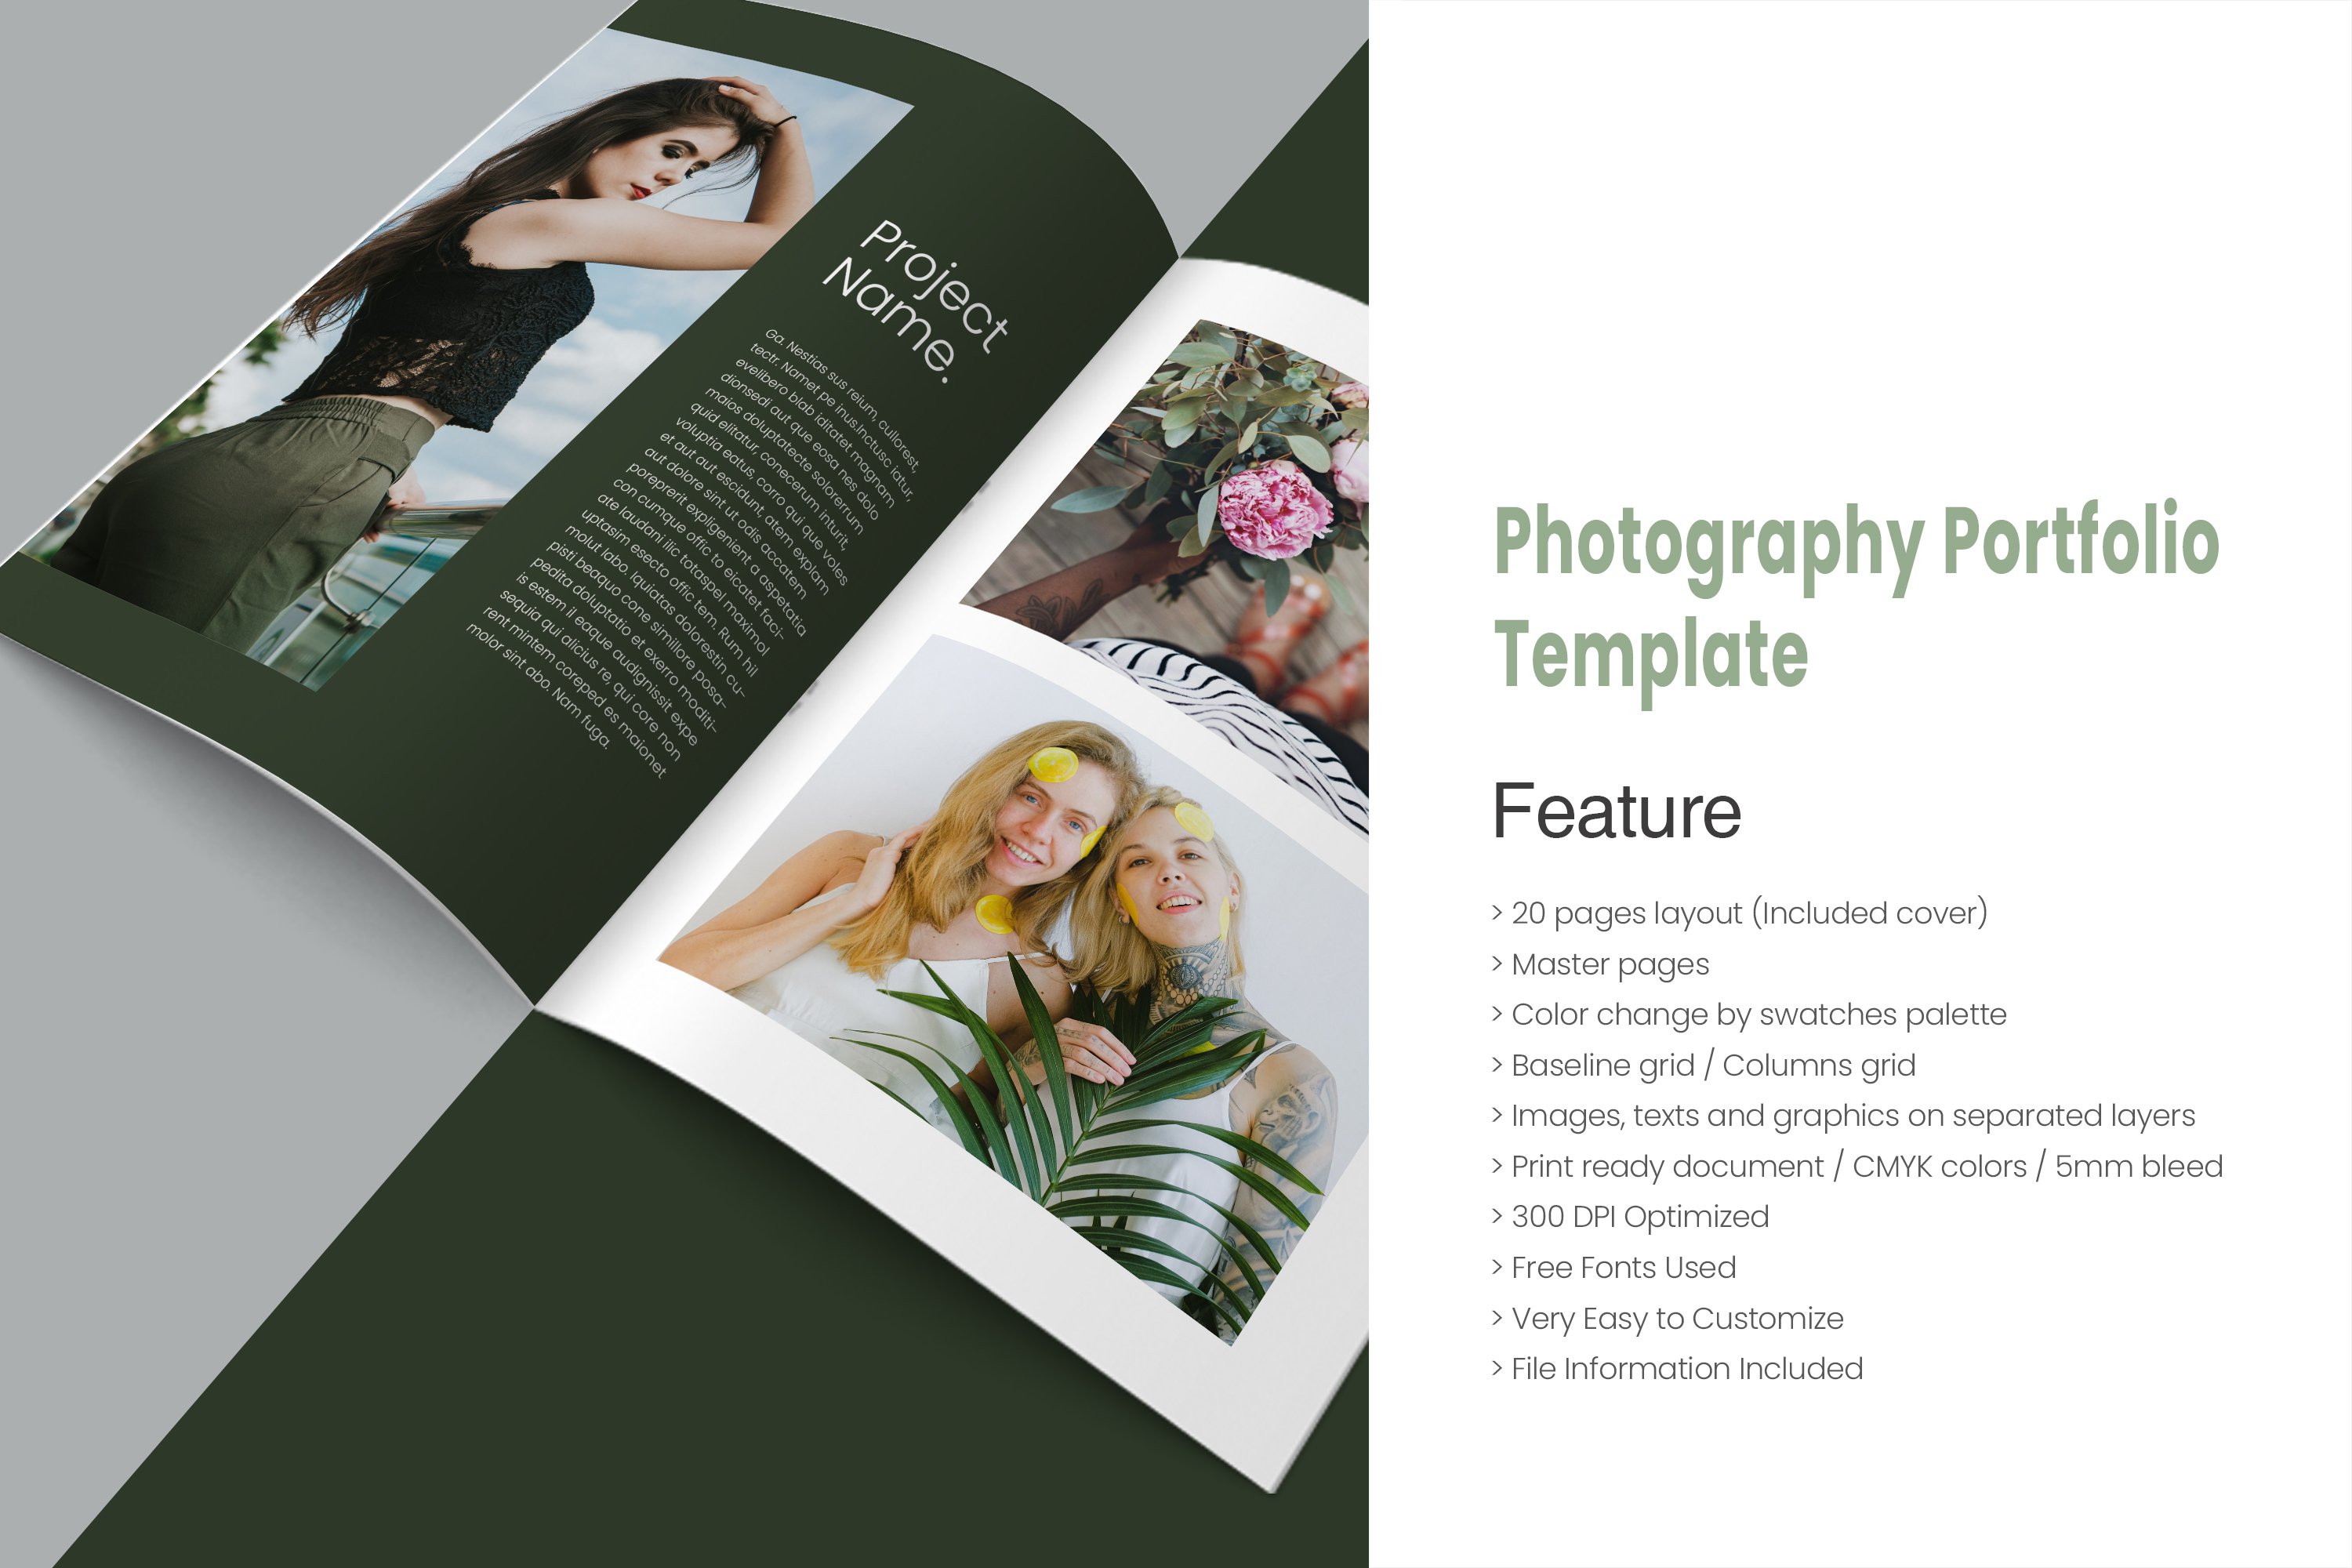 Photography Portfolio Template preview image.